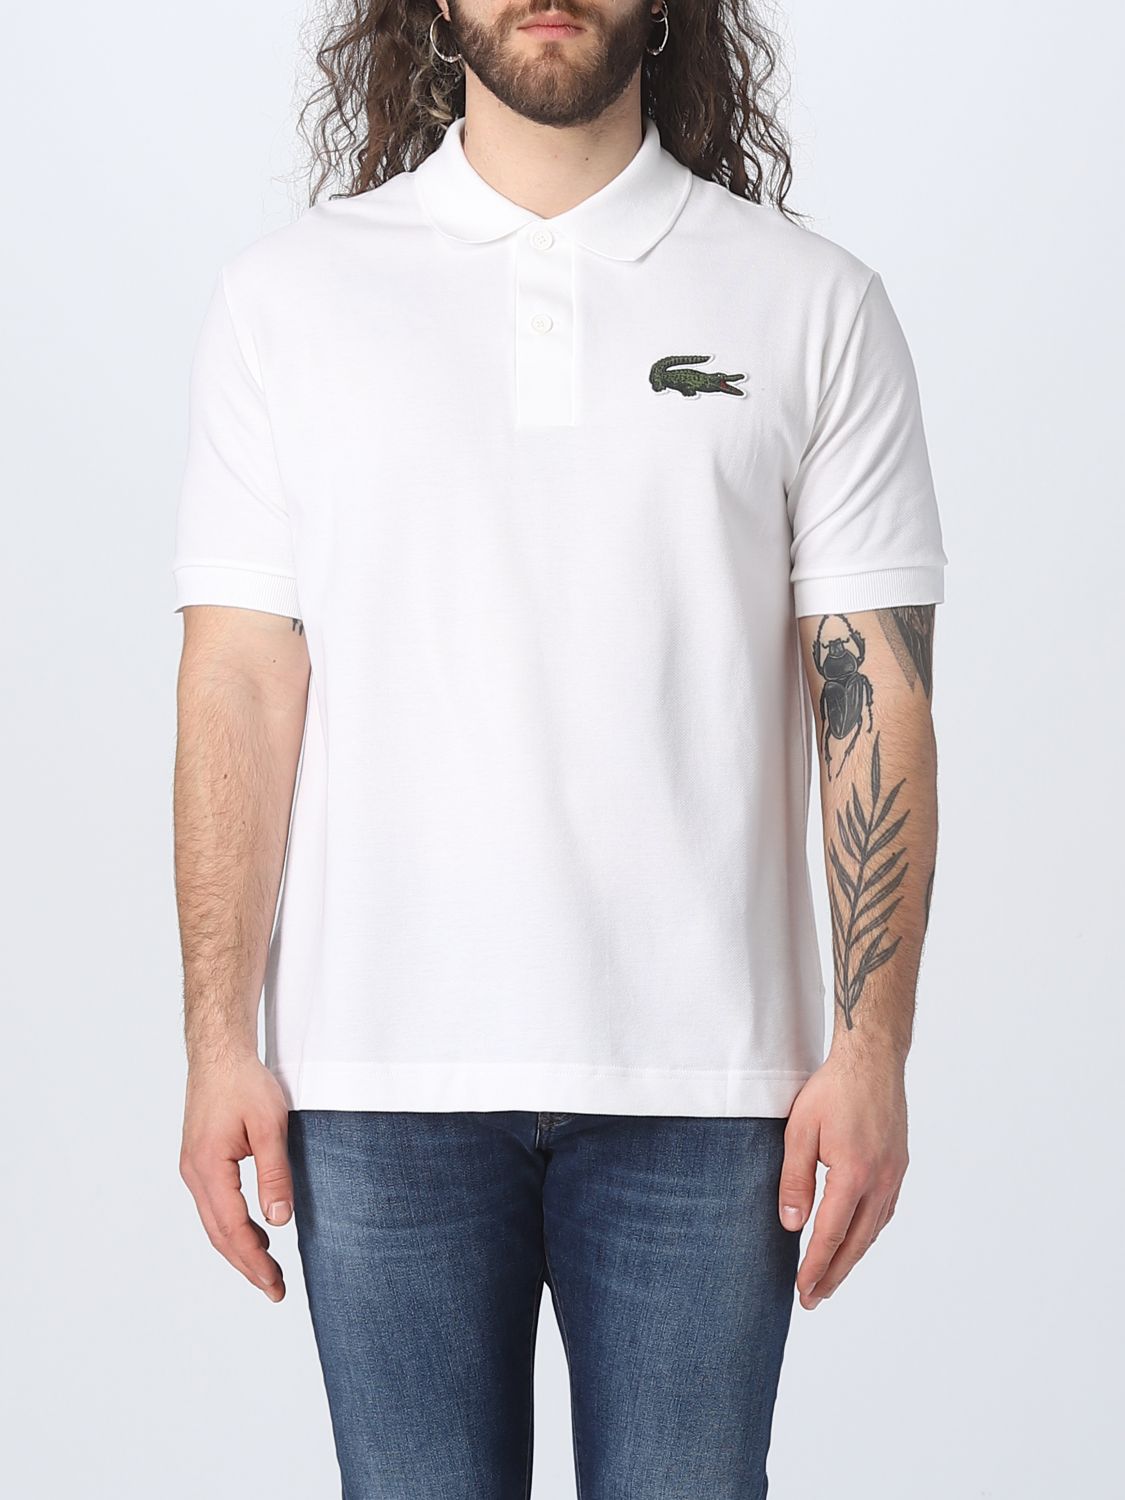 markering Dragende cirkel steeg LACOSTE: polo shirt for man - White | Lacoste polo shirt PH3922 online on  GIGLIO.COM